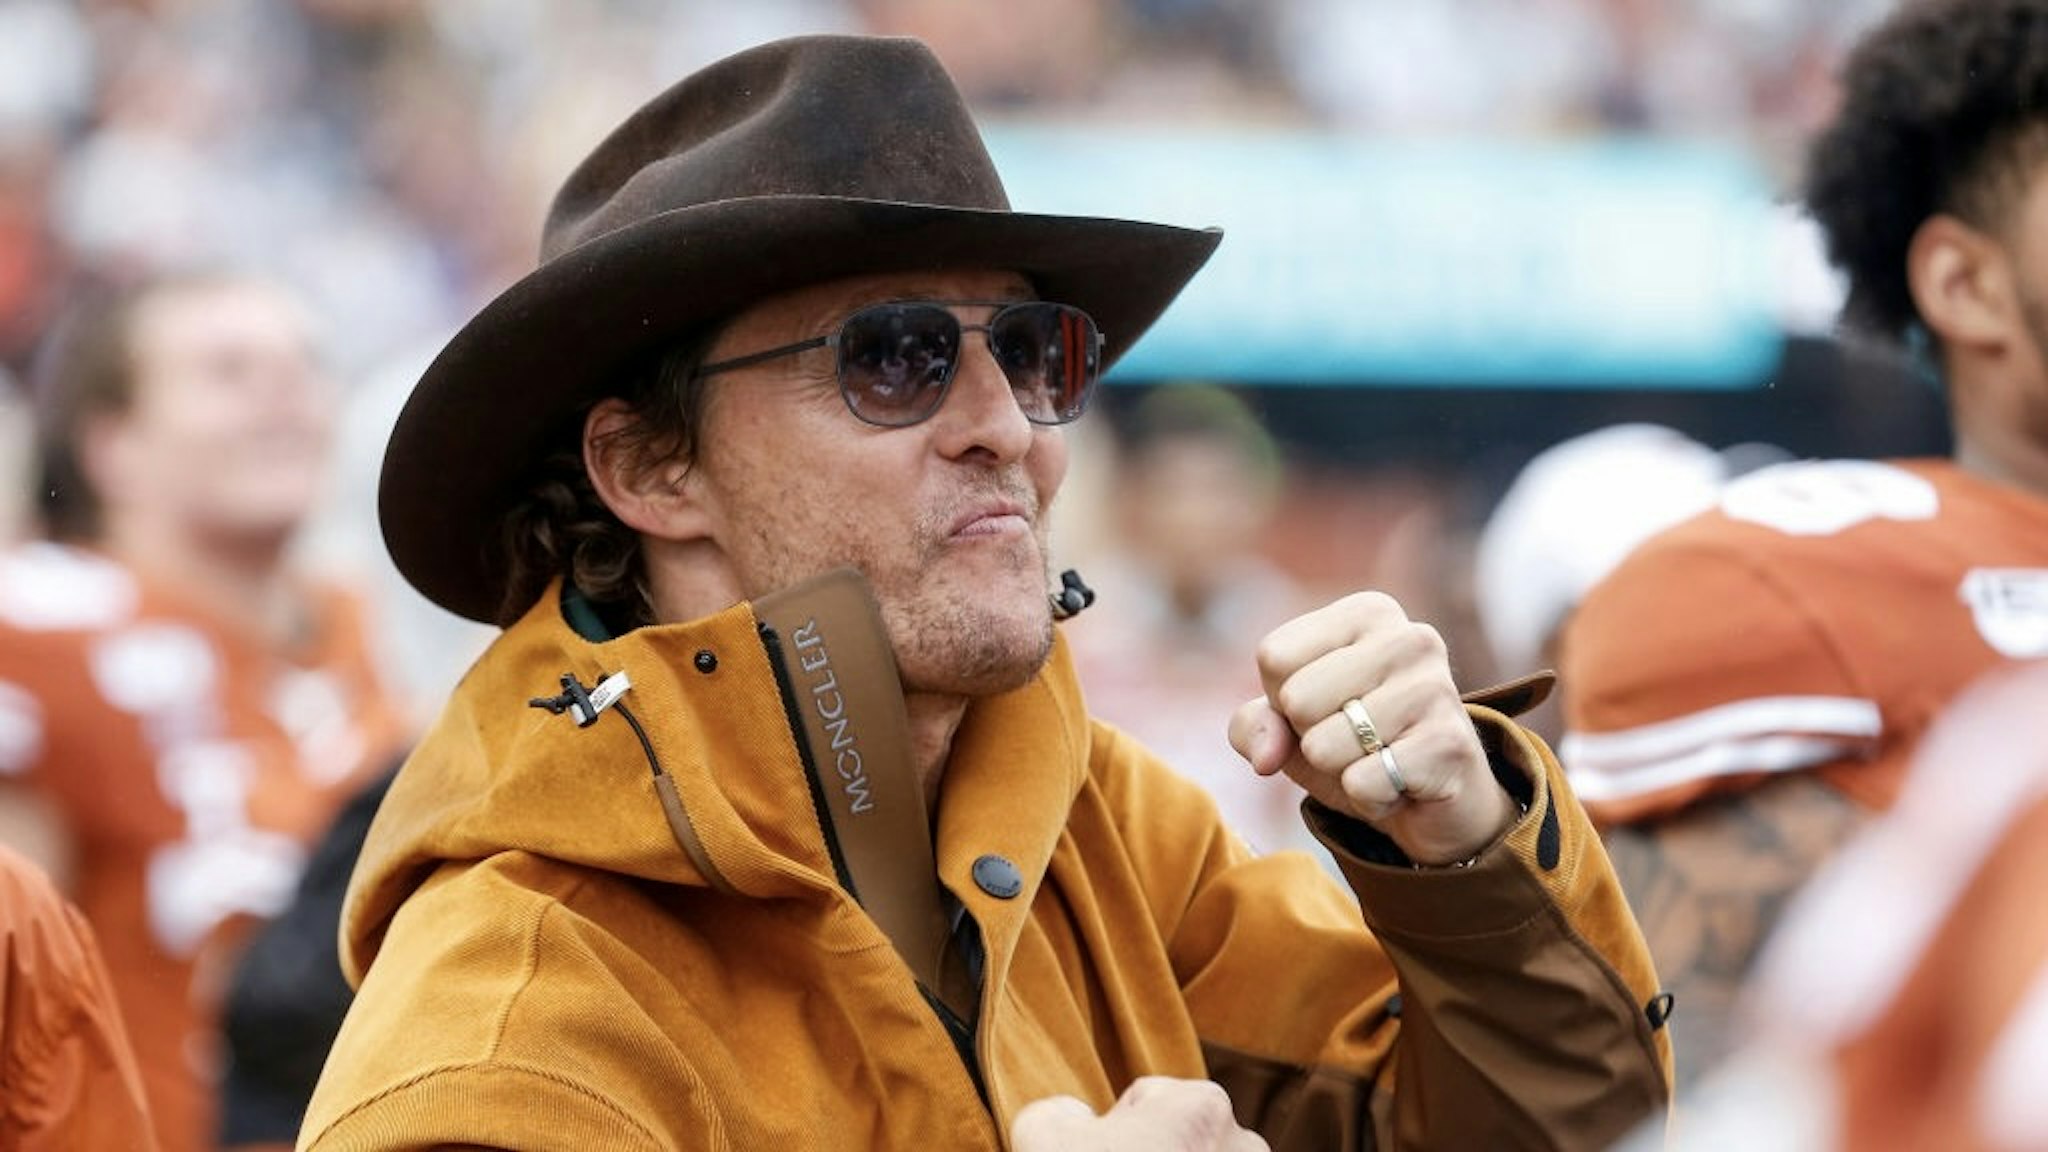 Texas Tech v Texas AUSTIN, TX - NOVEMBER 29: Actor Matthew McConaughey celebrates on the Texas Longhorns sideline in the second half against the Texas Tech Red Raiders at Darrell K Royal-Texas Memorial Stadium on November 29, 2019 in Austin, Texas. (Photo by Tim Warner/Getty Images) Tim Warner / Stringer via Getty Images